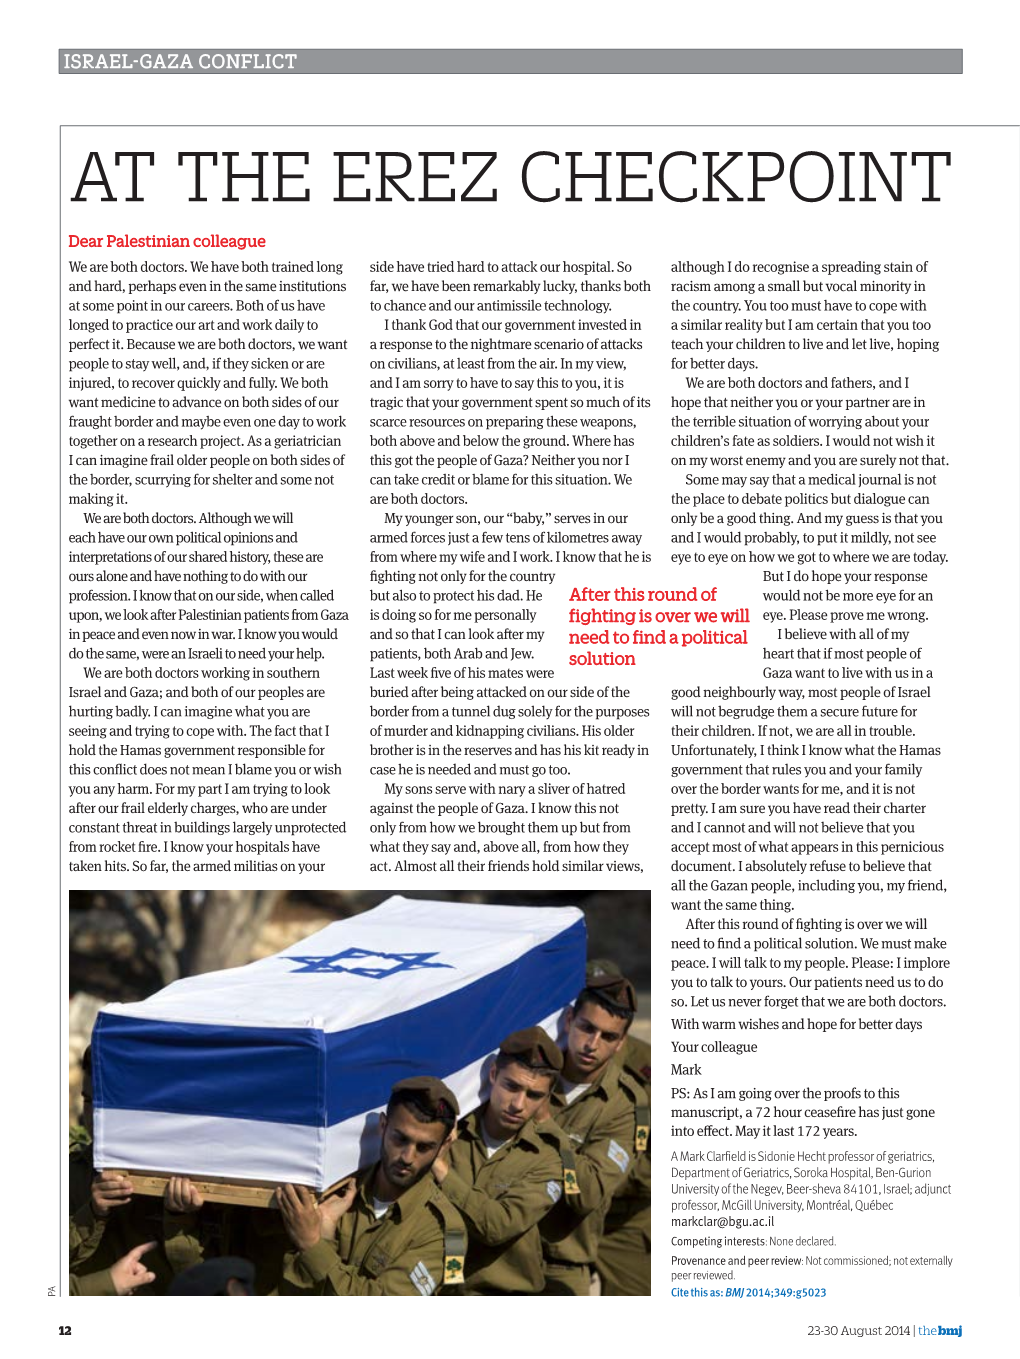 At the Erez Checkpoint